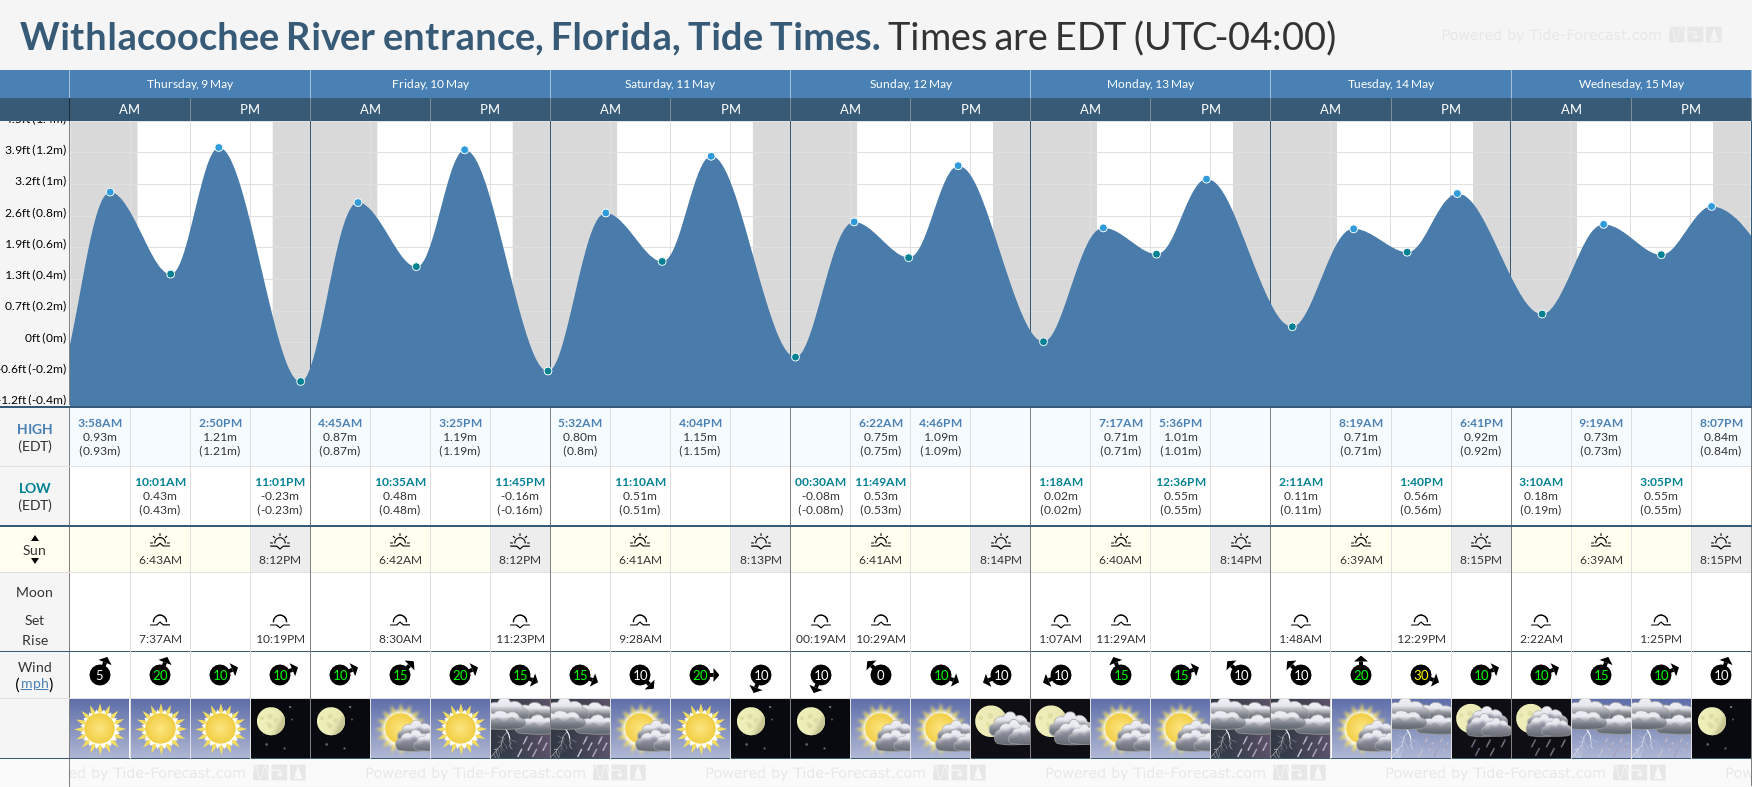 Withlacoochee River entrance, Florida Tide Chart including high and low tide tide times for the next 7 days